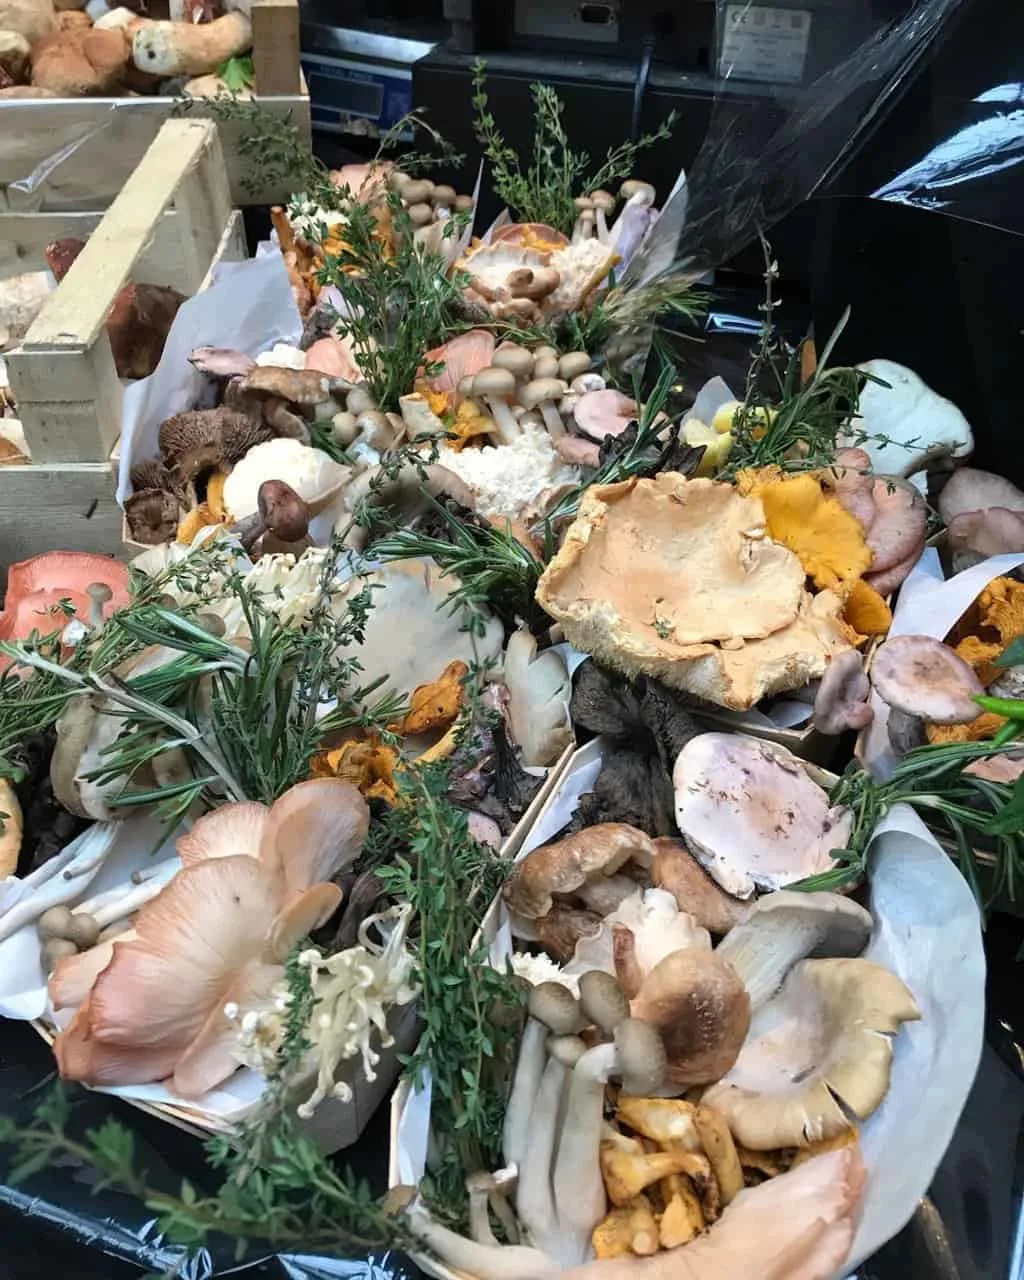 table filled with different types of mushrooms in Borough Market in London, UK